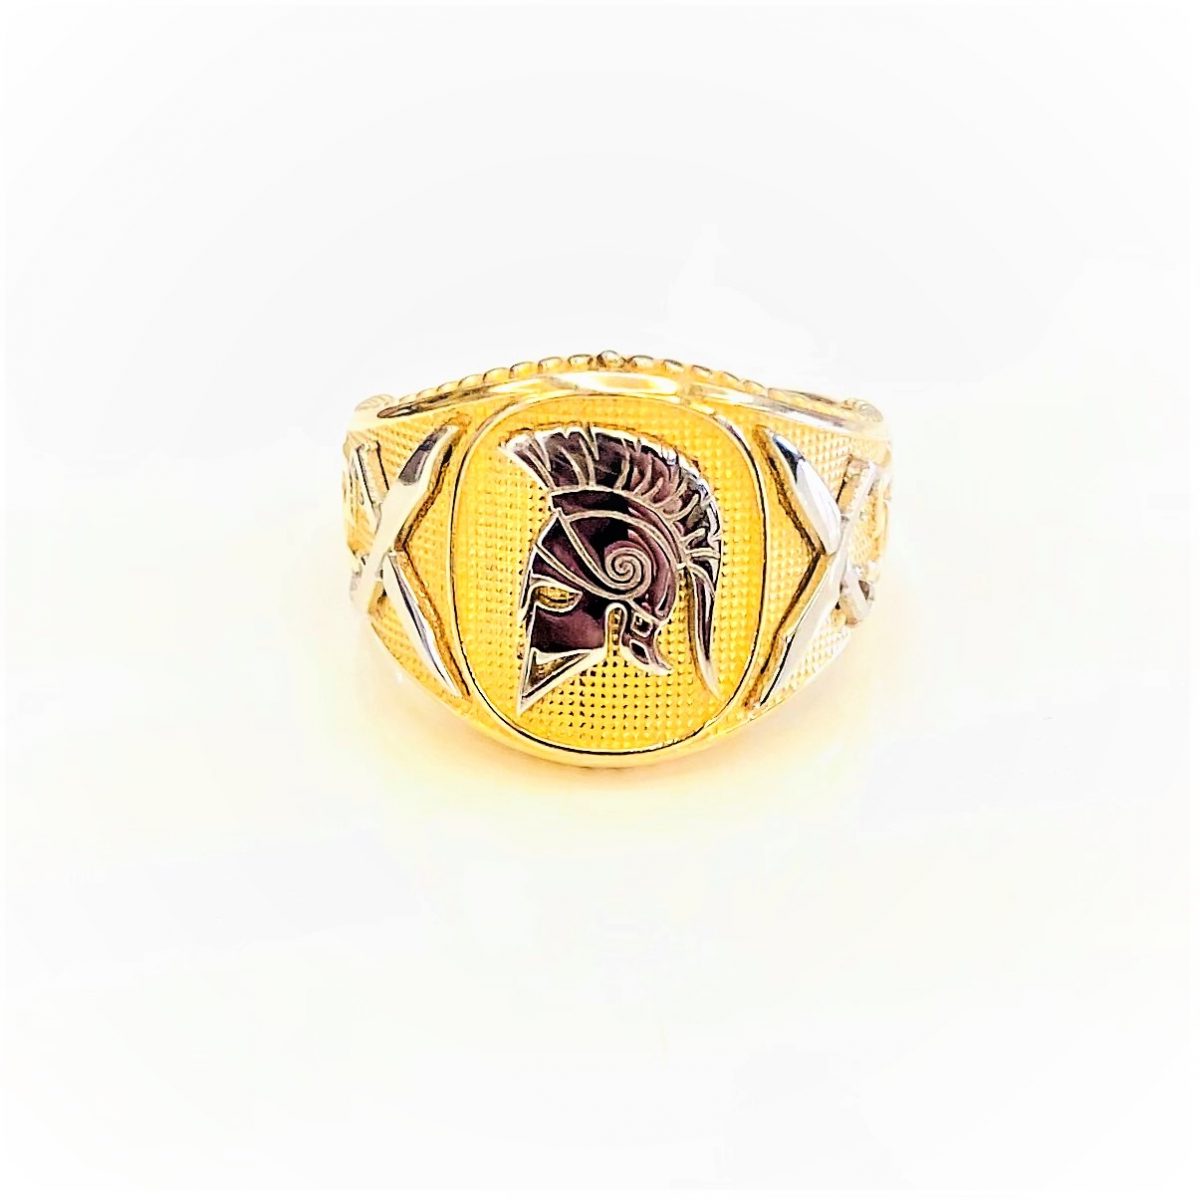 Gold Ring with Spartan warrior